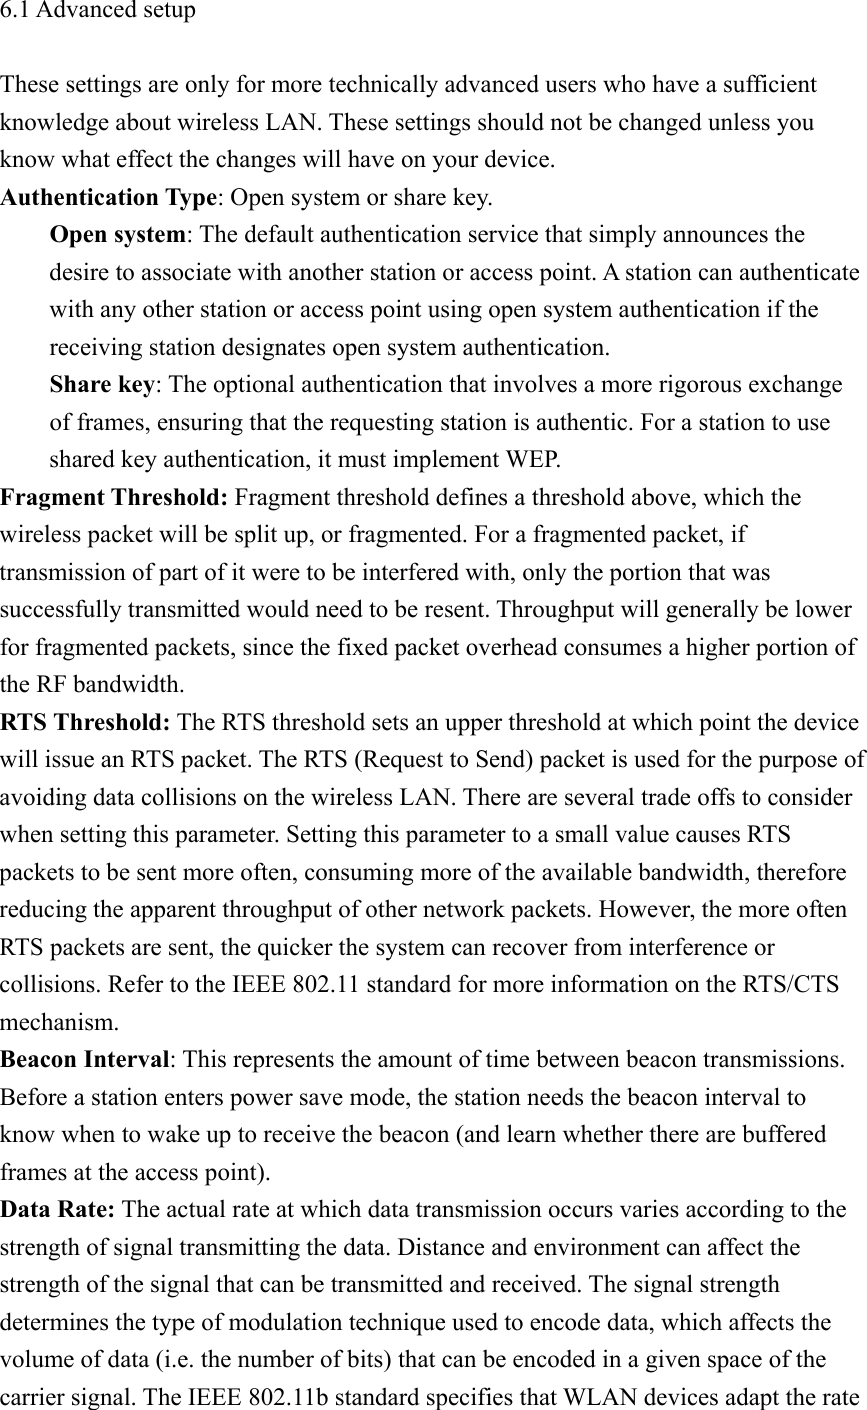 6.1 Advanced setup  These settings are only for more technically advanced users who have a sufficient knowledge about wireless LAN. These settings should not be changed unless you know what effect the changes will have on your device. Authentication Type: Open system or share key.     Open system: The default authentication service that simply announces the desire to associate with another station or access point. A station can authenticate with any other station or access point using open system authentication if the receiving station designates open system authentication.     Share key: The optional authentication that involves a more rigorous exchange of frames, ensuring that the requesting station is authentic. For a station to use shared key authentication, it must implement WEP. Fragment Threshold: Fragment threshold defines a threshold above, which the wireless packet will be split up, or fragmented. For a fragmented packet, if transmission of part of it were to be interfered with, only the portion that was successfully transmitted would need to be resent. Throughput will generally be lower for fragmented packets, since the fixed packet overhead consumes a higher portion of the RF bandwidth. RTS Threshold: The RTS threshold sets an upper threshold at which point the device will issue an RTS packet. The RTS (Request to Send) packet is used for the purpose of avoiding data collisions on the wireless LAN. There are several trade offs to consider when setting this parameter. Setting this parameter to a small value causes RTS packets to be sent more often, consuming more of the available bandwidth, therefore reducing the apparent throughput of other network packets. However, the more often RTS packets are sent, the quicker the system can recover from interference or collisions. Refer to the IEEE 802.11 standard for more information on the RTS/CTS mechanism. Beacon Interval: This represents the amount of time between beacon transmissions. Before a station enters power save mode, the station needs the beacon interval to know when to wake up to receive the beacon (and learn whether there are buffered frames at the access point). Data Rate: The actual rate at which data transmission occurs varies according to the strength of signal transmitting the data. Distance and environment can affect the strength of the signal that can be transmitted and received. The signal strength determines the type of modulation technique used to encode data, which affects the volume of data (i.e. the number of bits) that can be encoded in a given space of the carrier signal. The IEEE 802.11b standard specifies that WLAN devices adapt the rate 